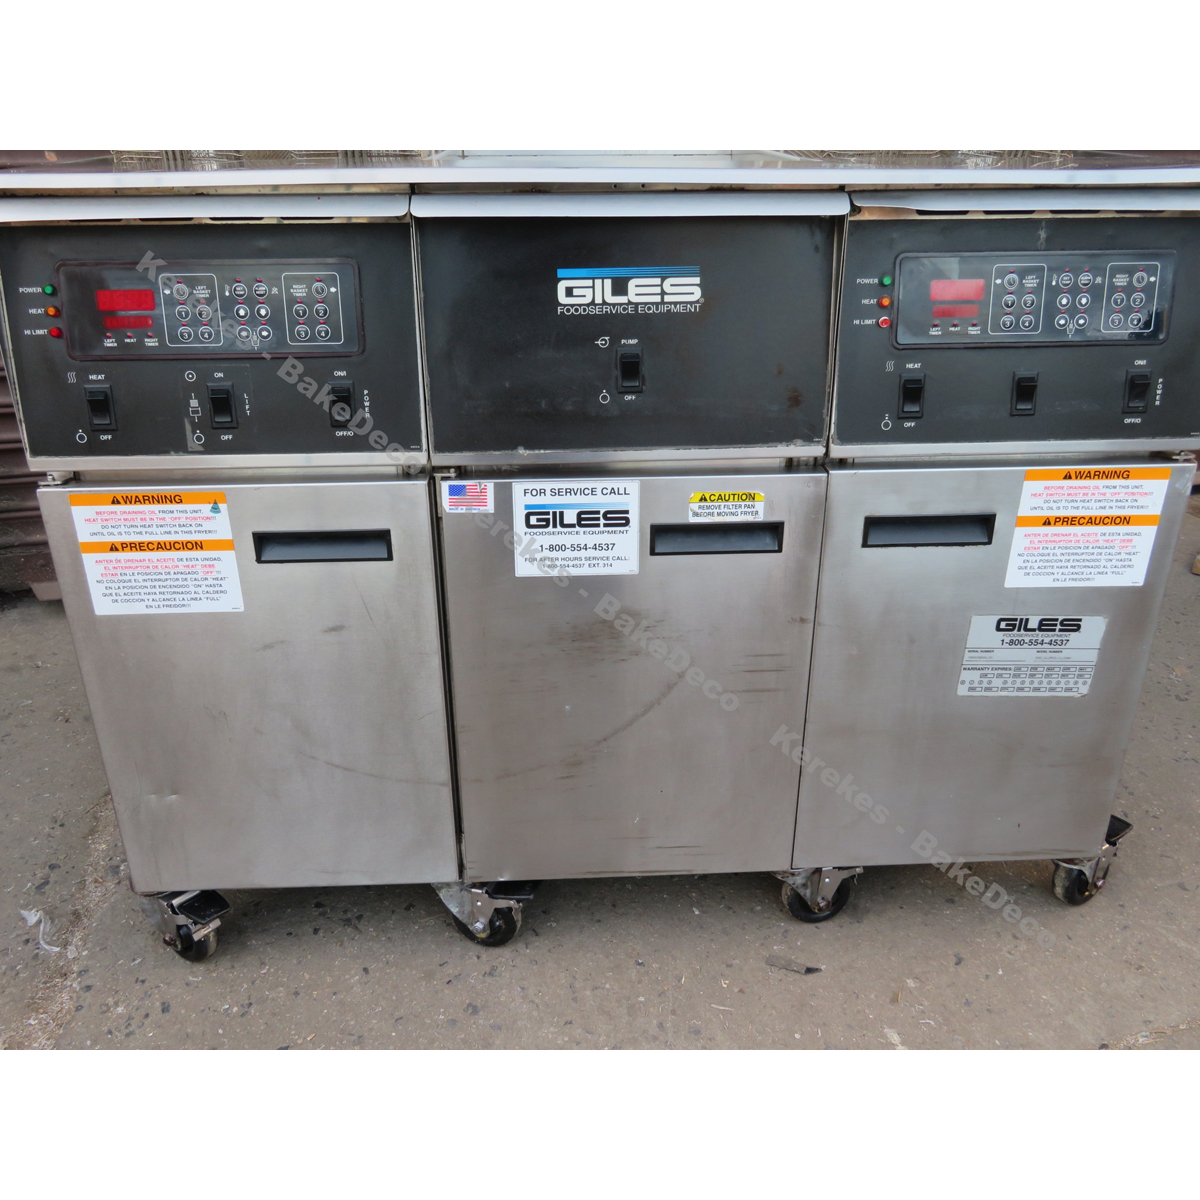 Giles Electric Banked Fryer EOF-14/FFLT/14, W/Autolift System, Used Excellent Condition image 1